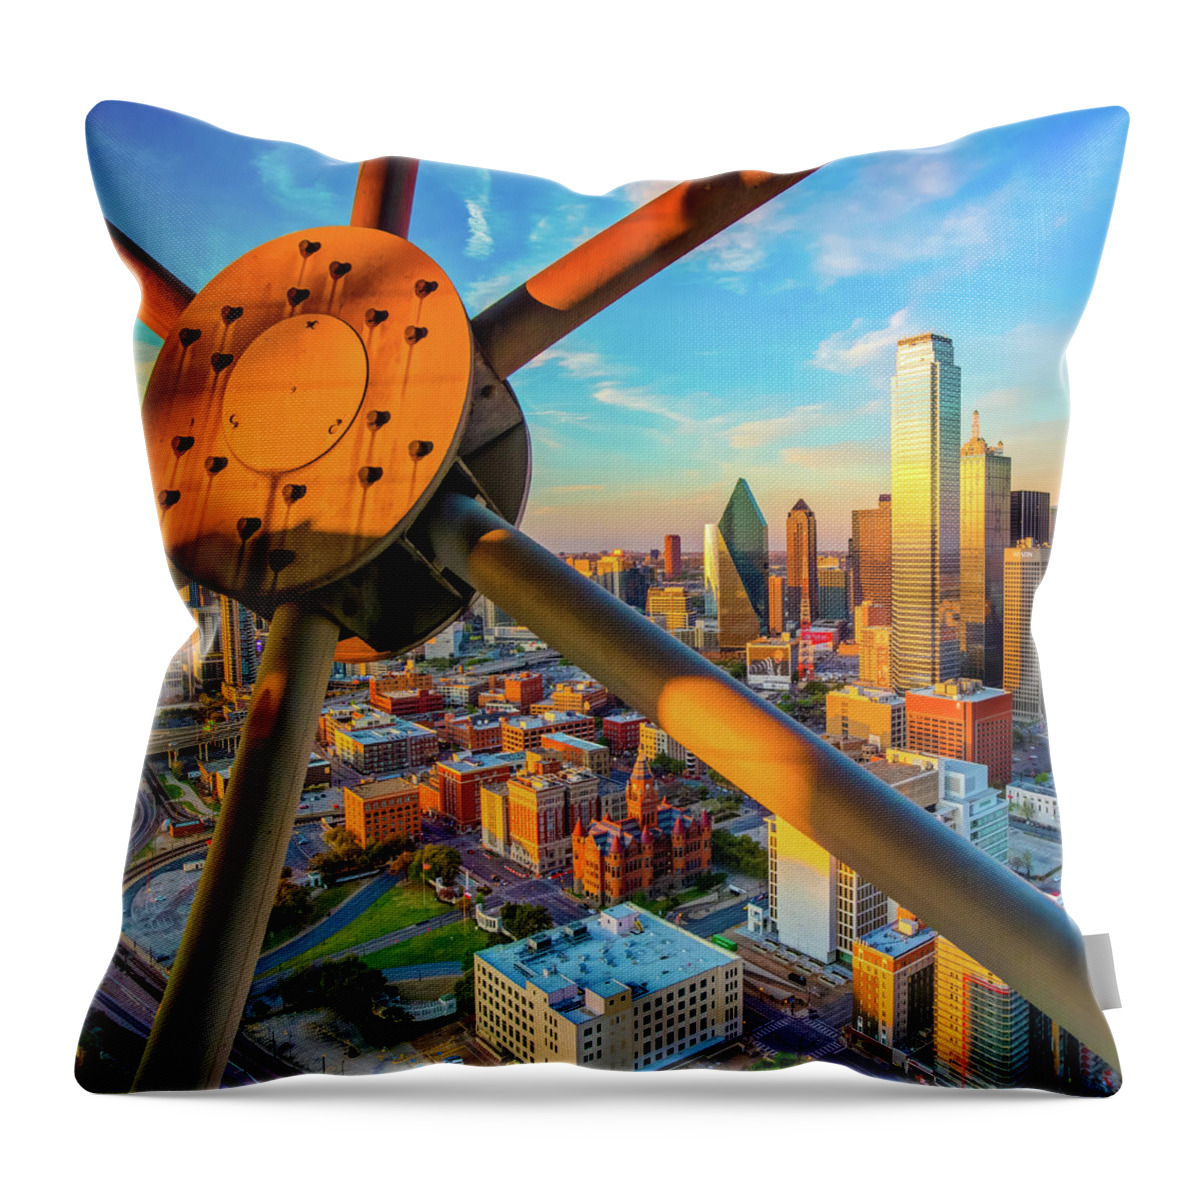 America Throw Pillow featuring the photograph Downtown Dallas Texas Skyline at Sunset 1x1 by Gregory Ballos